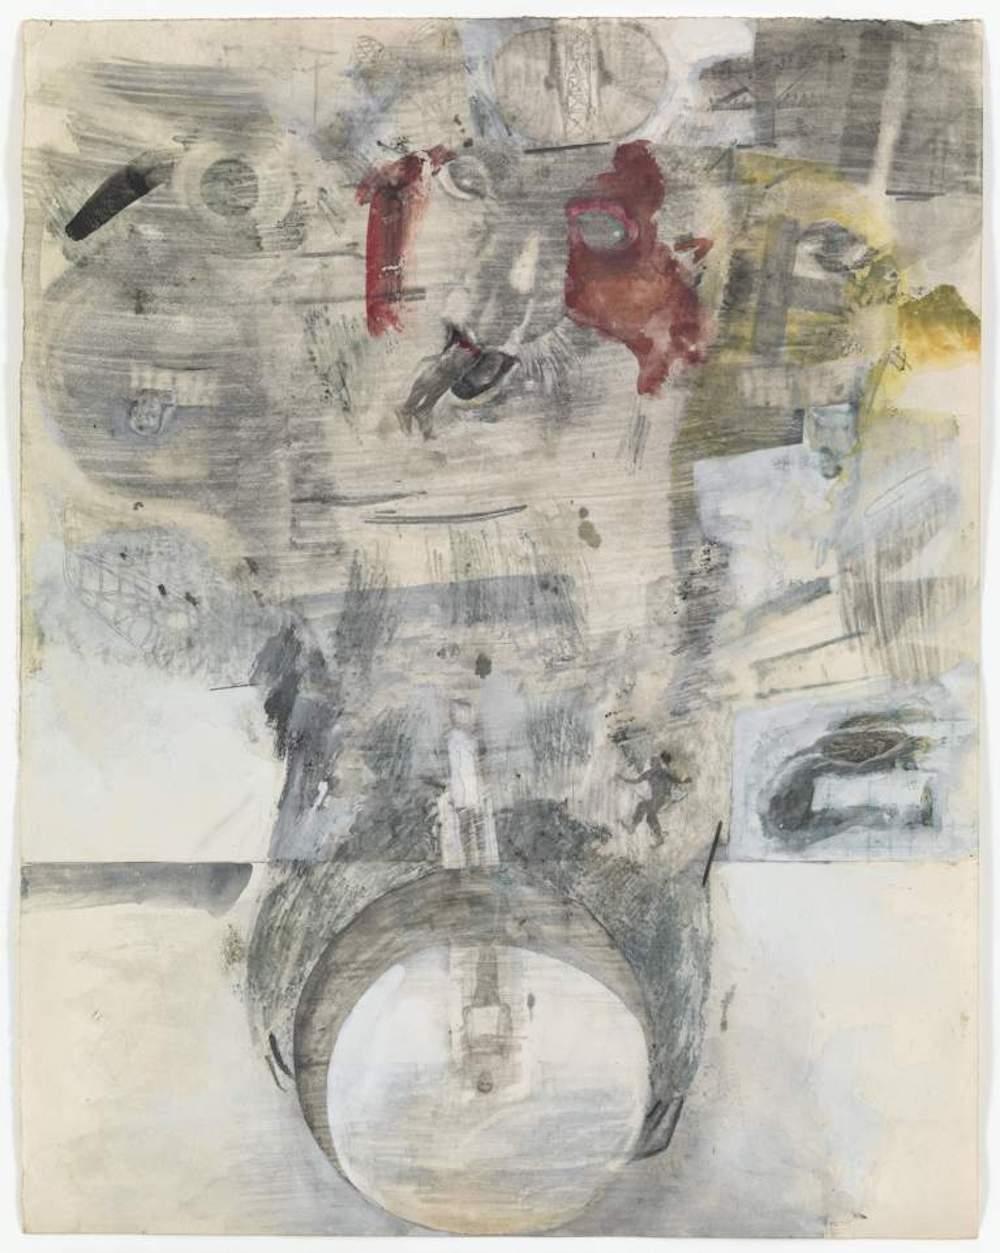 Robert Rauschenberg, XXXIV Drawings for Dante's Inferno: XXXIV, 1965. Color offset lithograph. Sheet: 14 9/16 × 11 7/16 in. (37 × 29 cm).  Blanton Museum of Art, The University of Texas at Austin, Archer M. Huntington Museum Fund, 1966, Art © Robert Rauschenberg Foundation/Licensed by VAGA, New York, NY